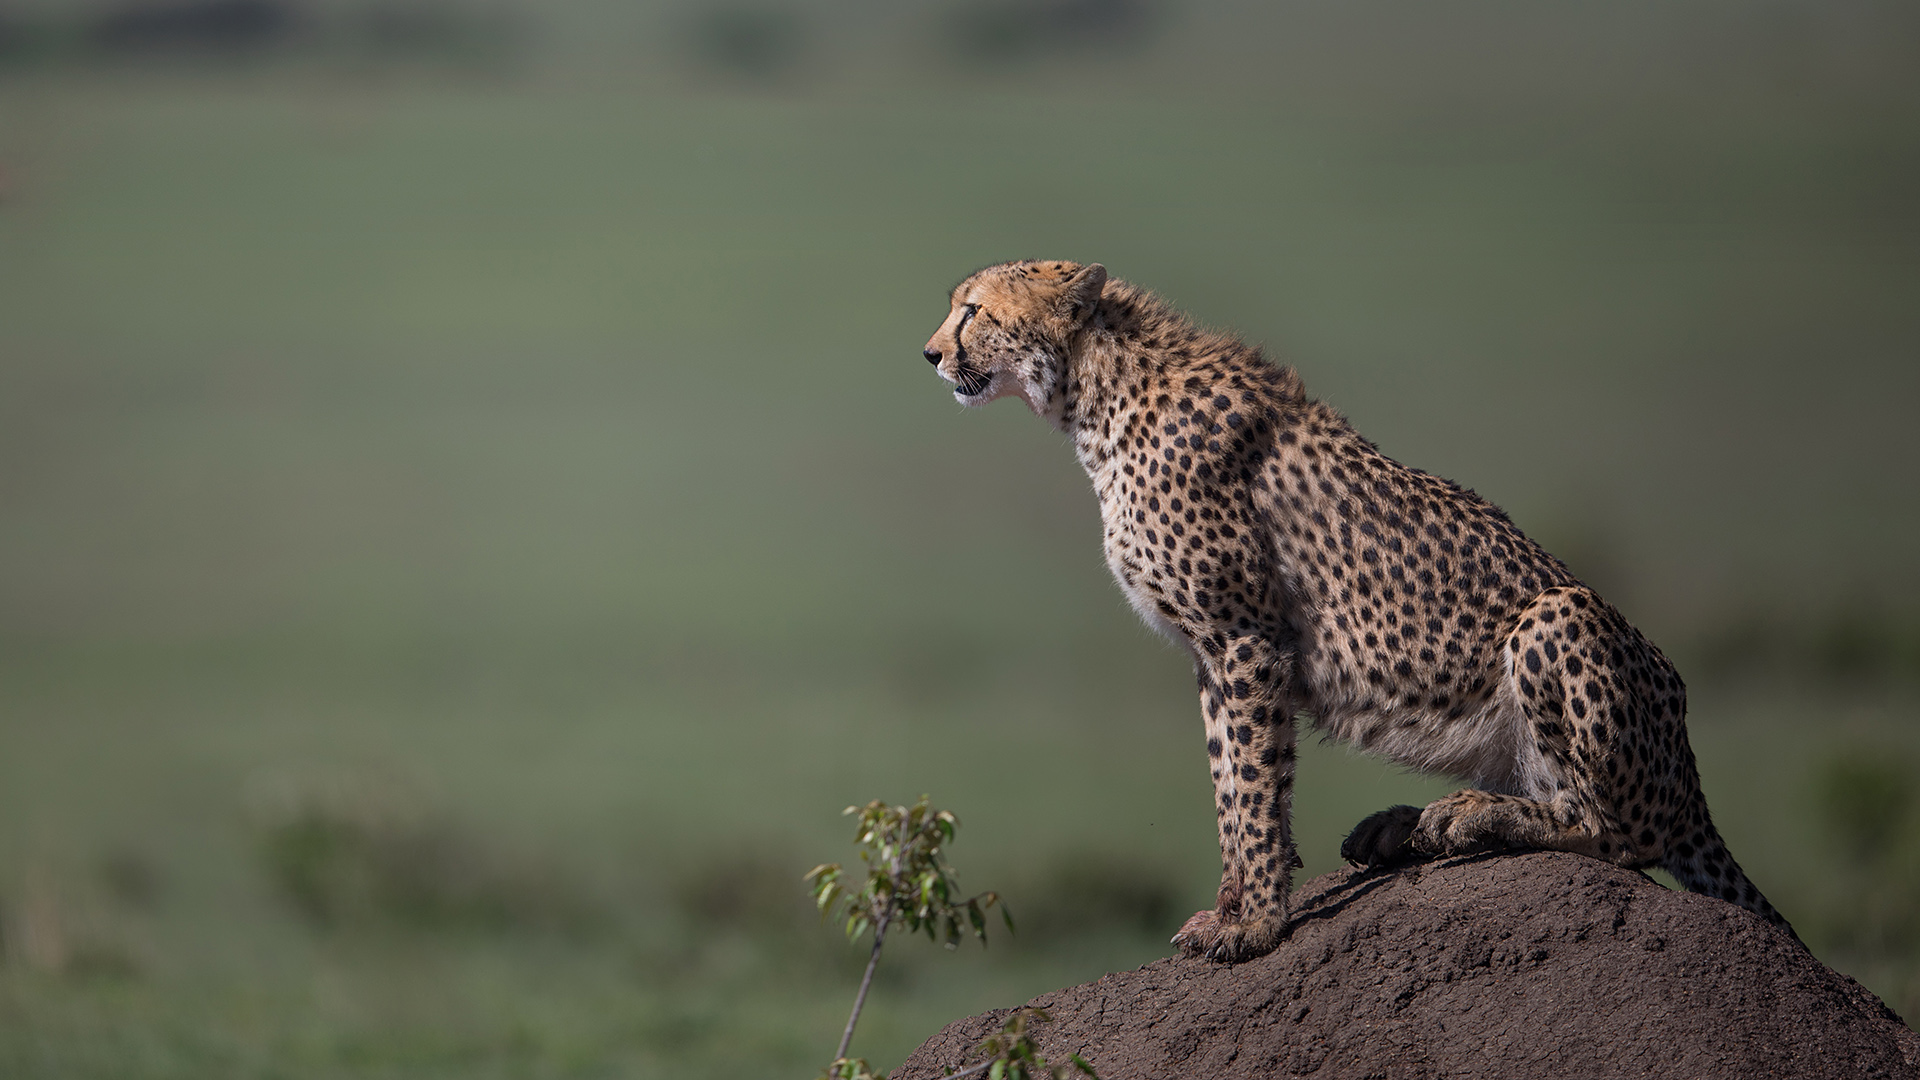 A cheetah sits on top of a mound of earth looking out at the landscape